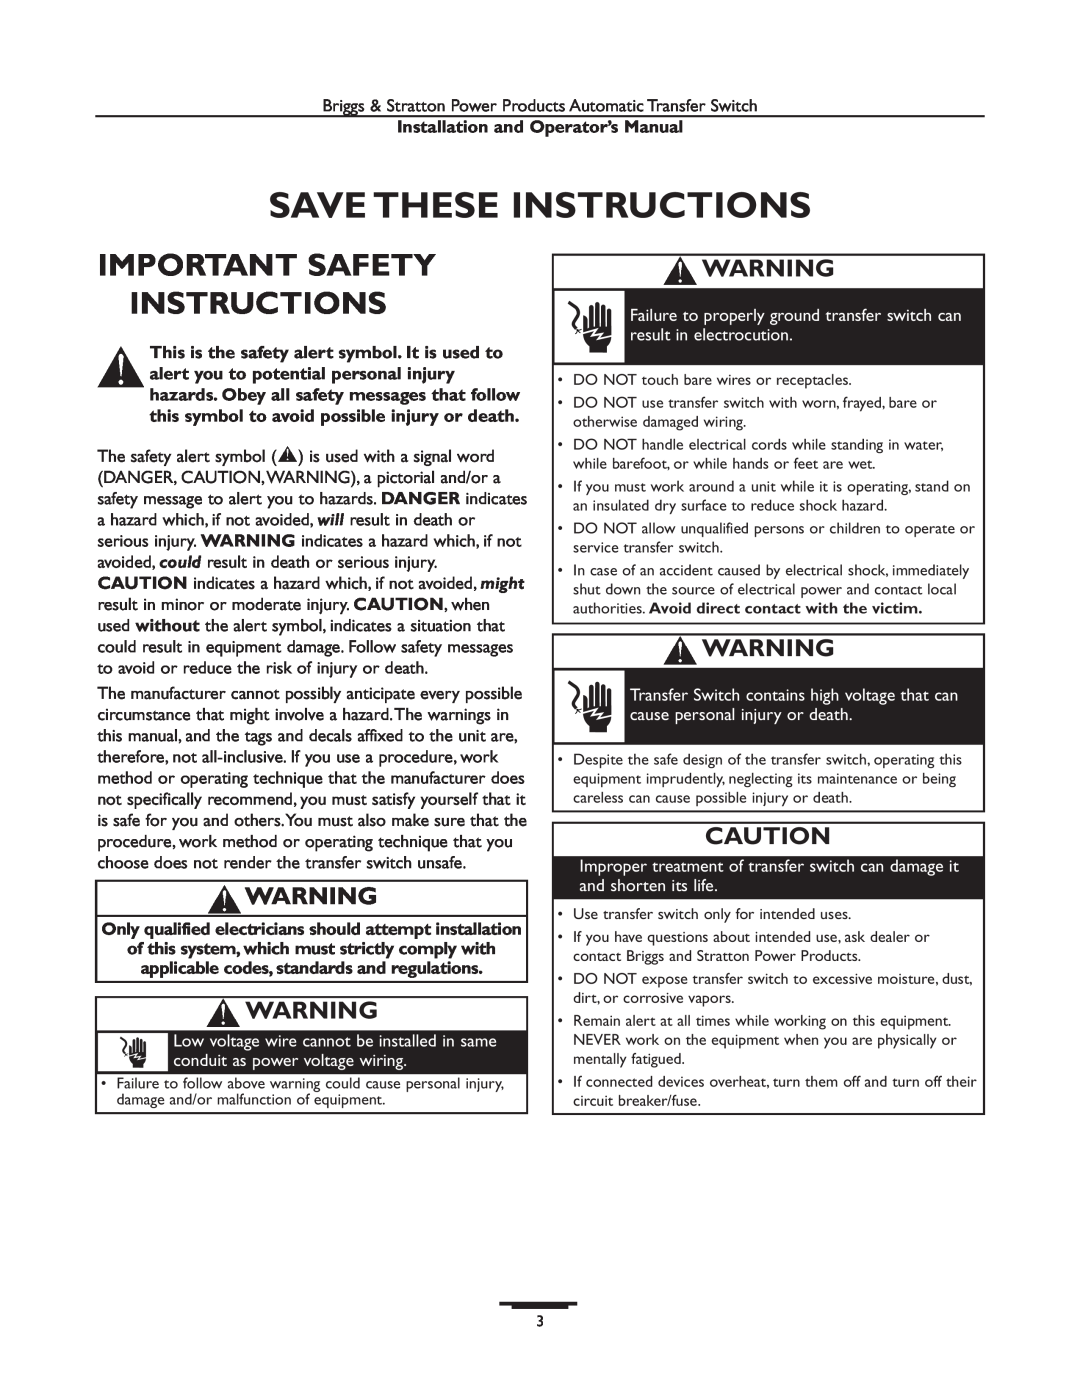 Briggs & Stratton 01813-1, 01928-1 Important Safety Instructions, Only qualified electricians should attempt installation 